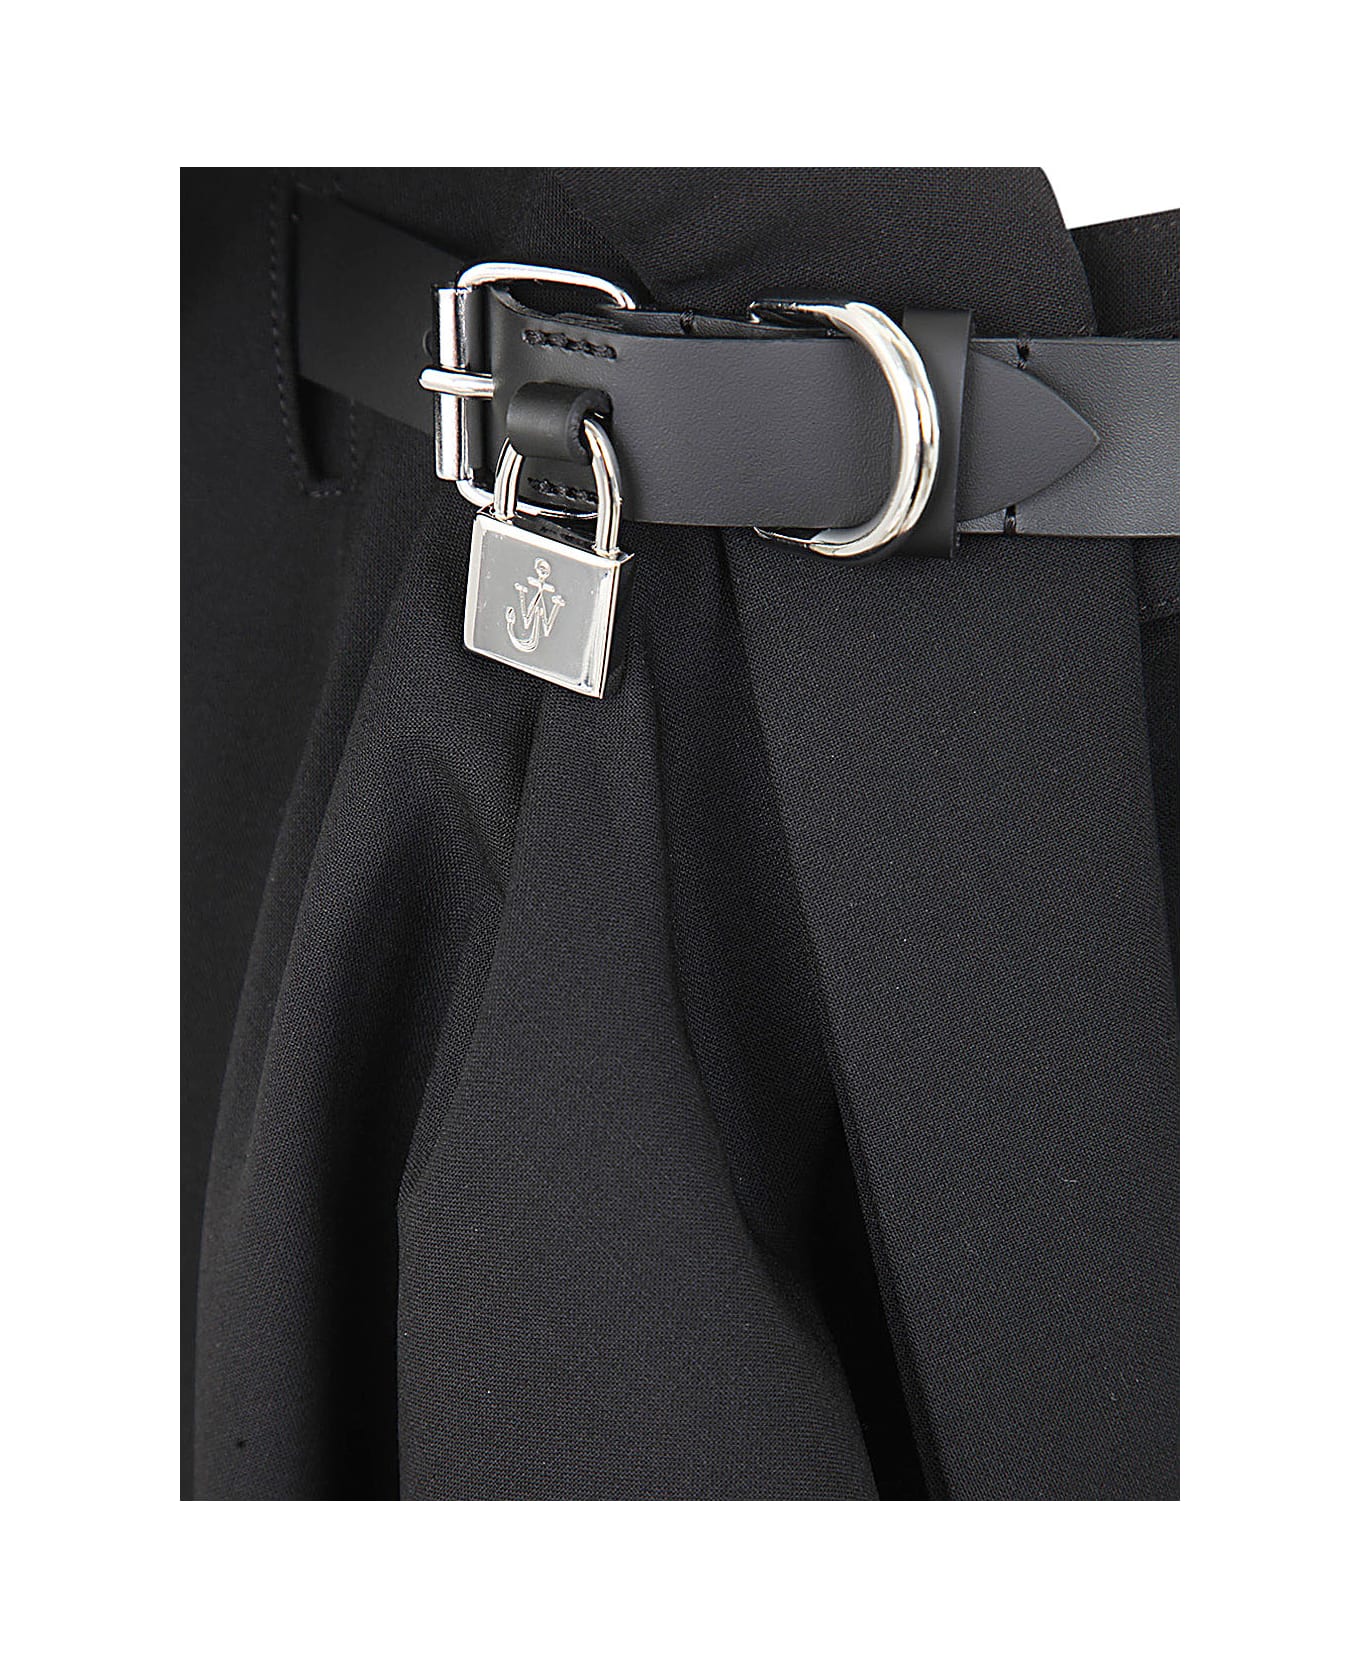 J.W. Anderson Padlock Strap Fold Over Trousers - Black ボトムス